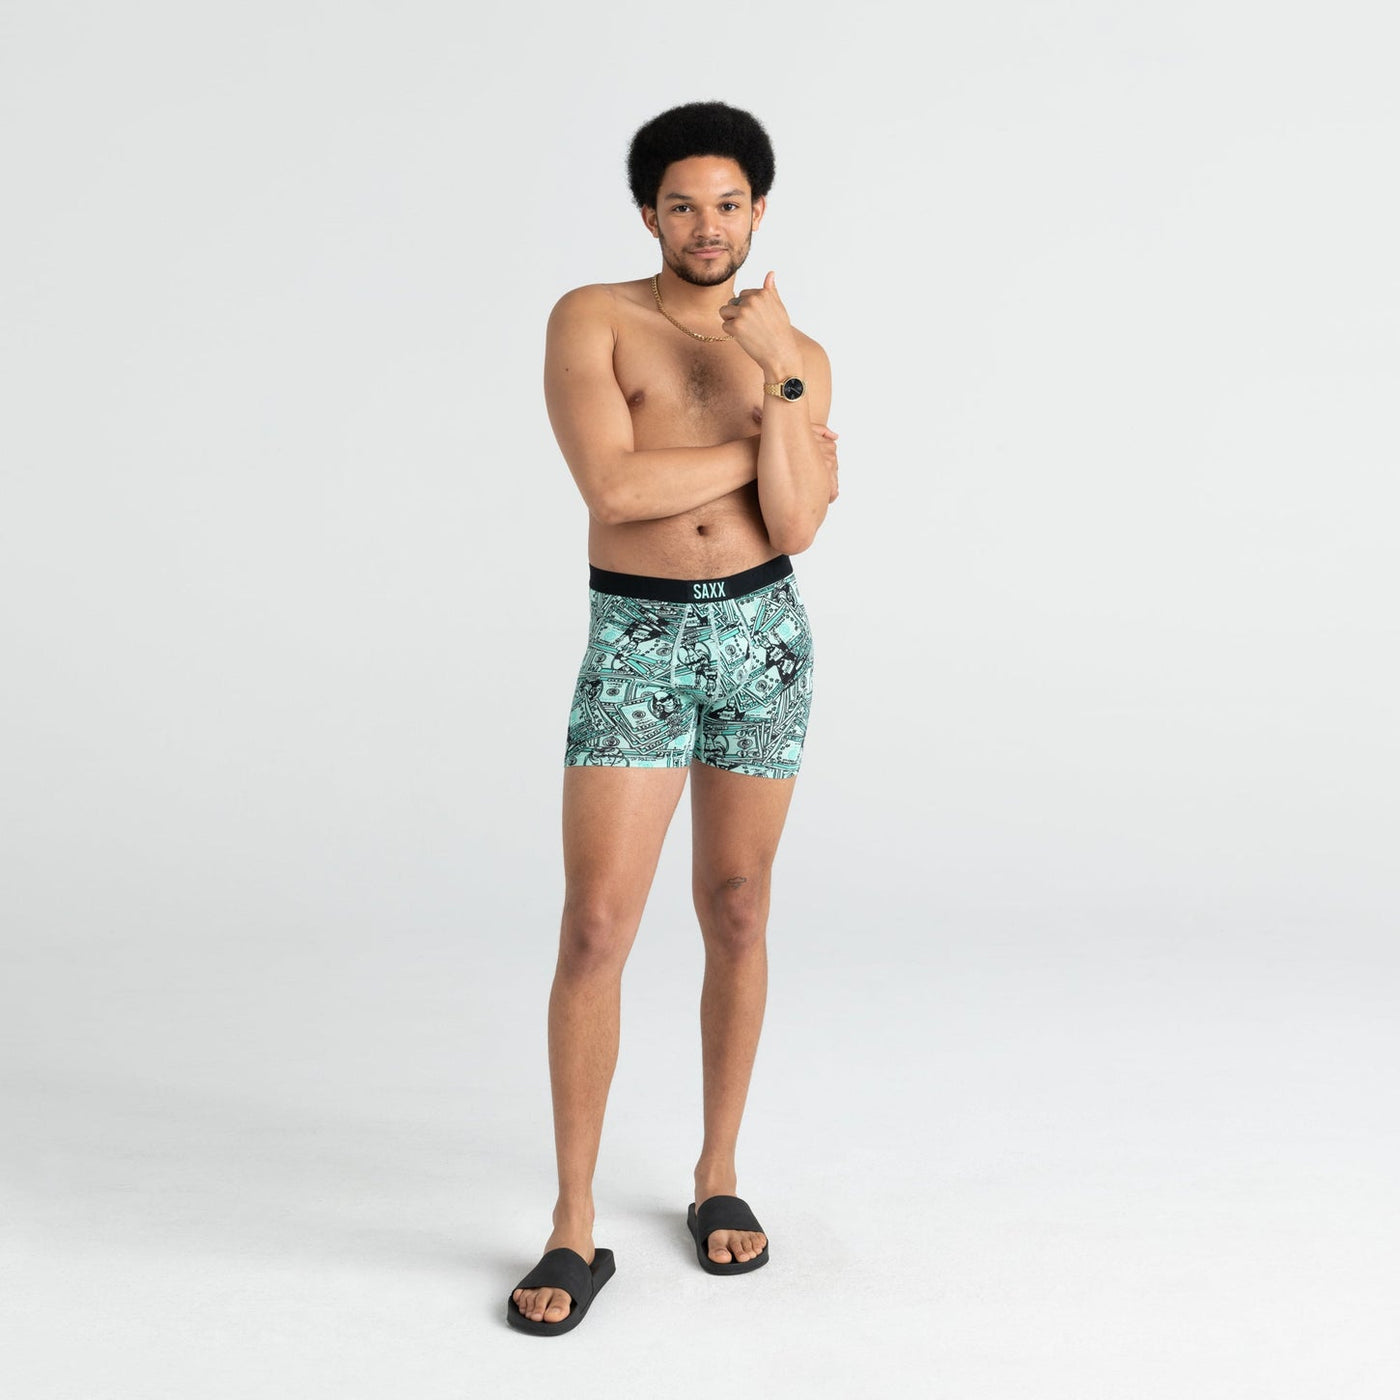 Vibe Boxer Brief - Cold Hard Cash- Ice Green